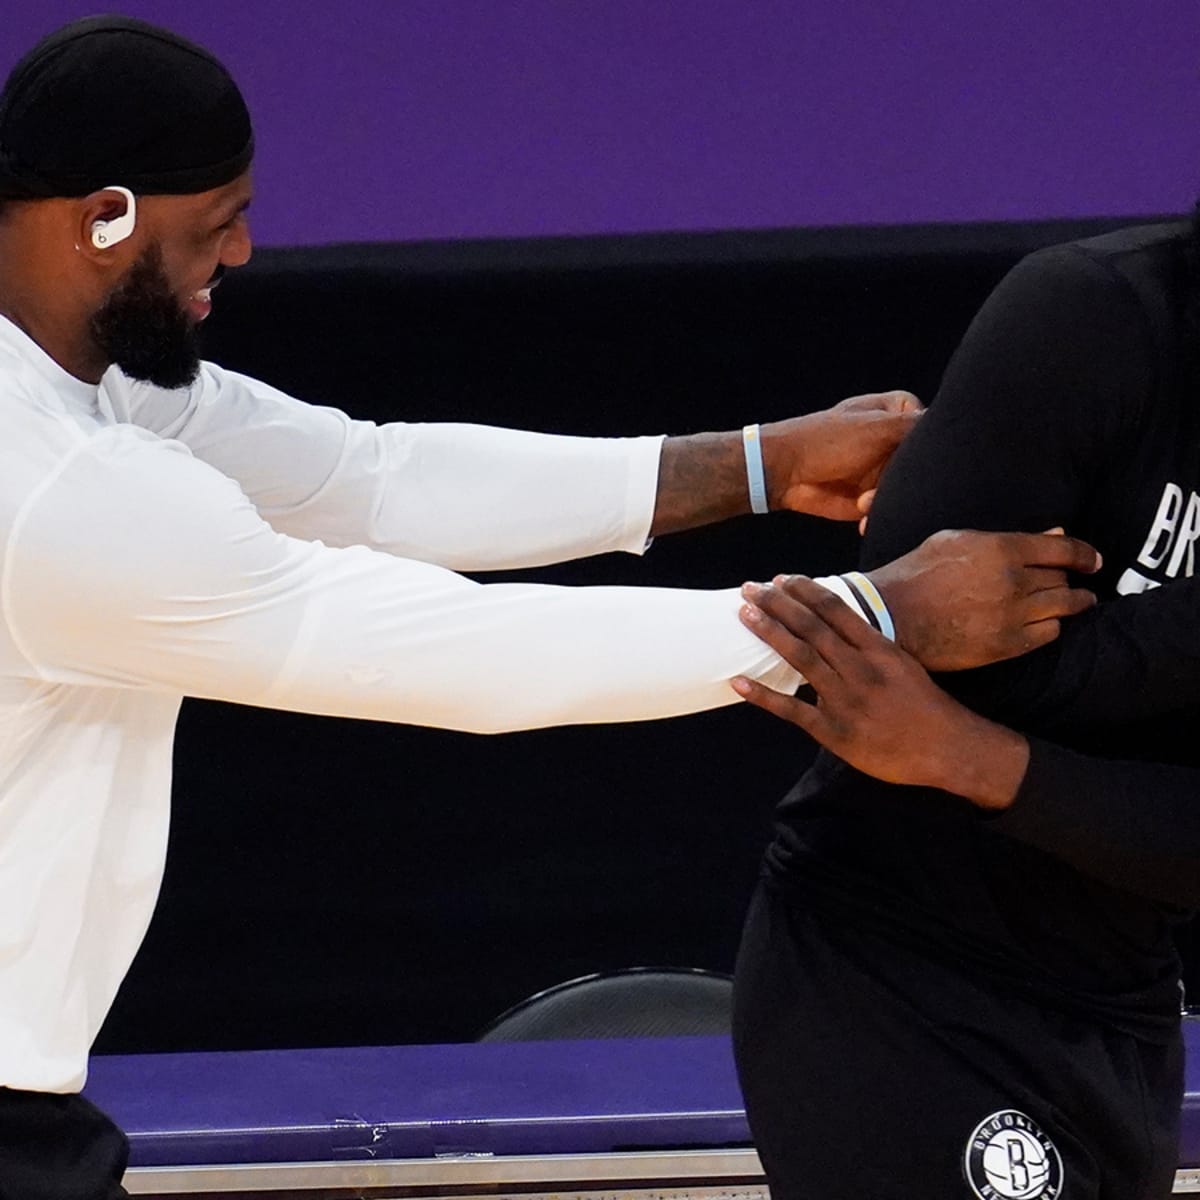 Lakers-Nets is the NBA Finals matchup the world needs 